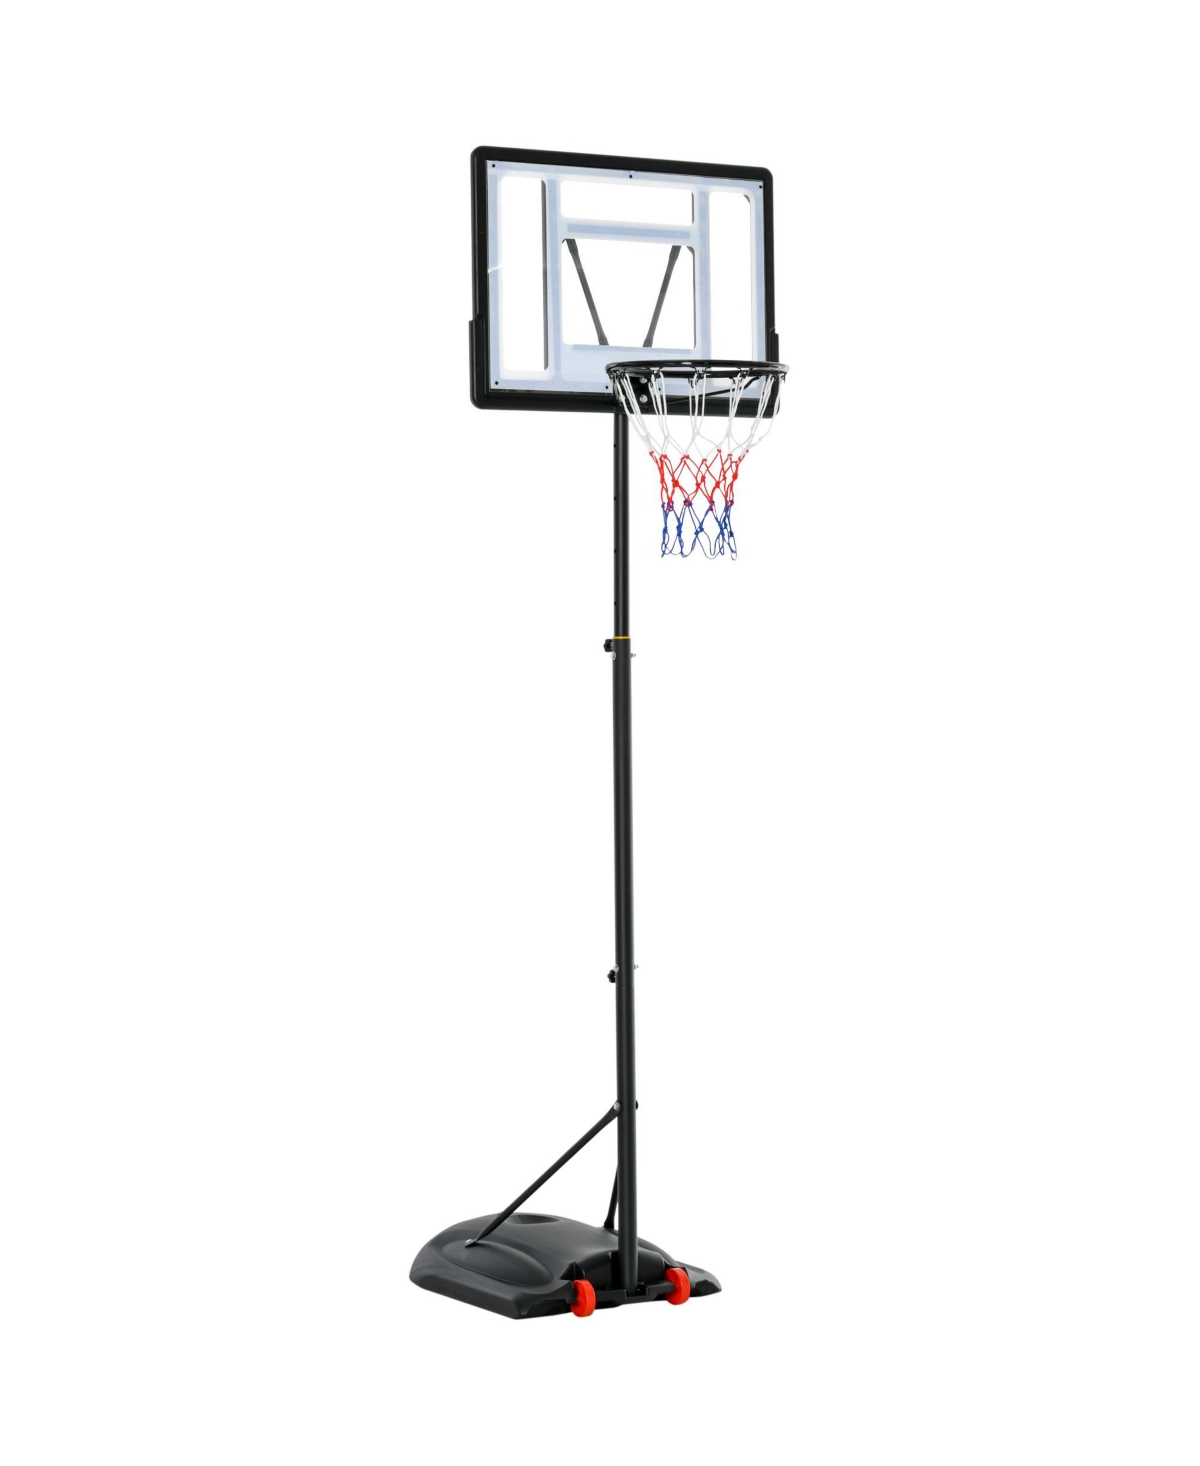 Basketball Hoop System Stand with Height Adjustable 5.5FT-7.5FT, Portable Wheels, Upgraded Base for Indoor Outdoor Use - Black